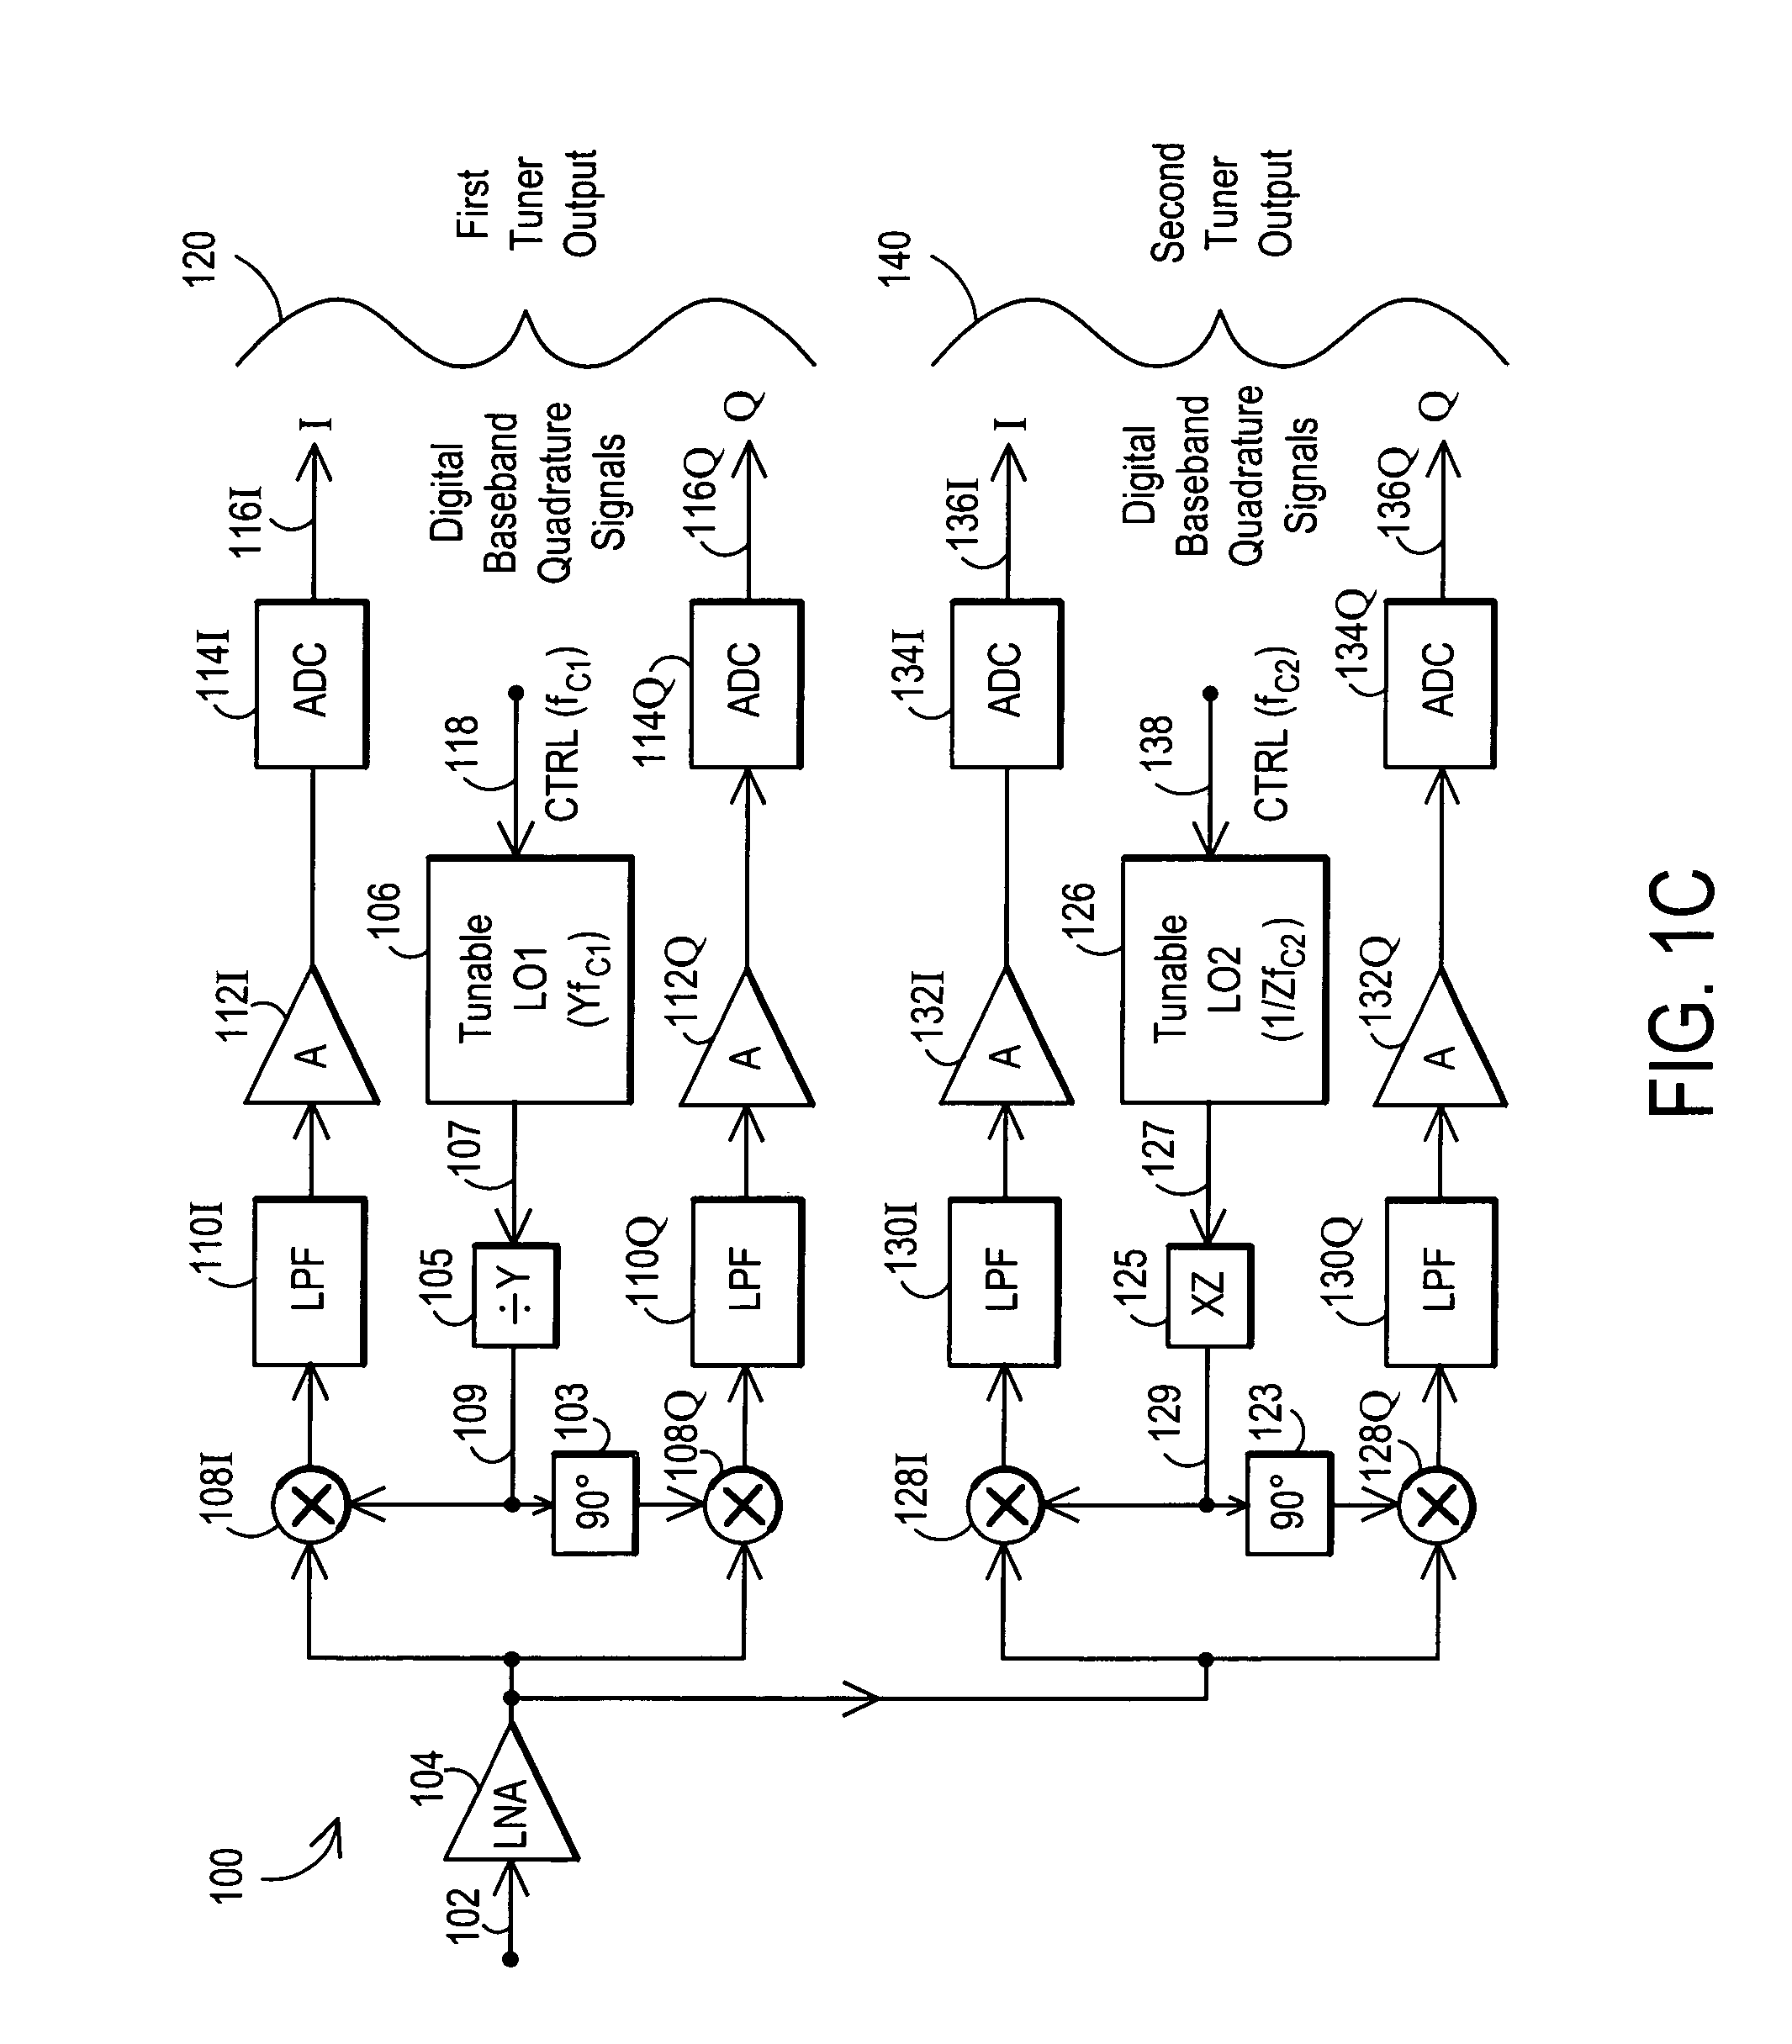 Multi-tuner integrated circuit architecture utilizing frequency isolated local oscillators and associated method